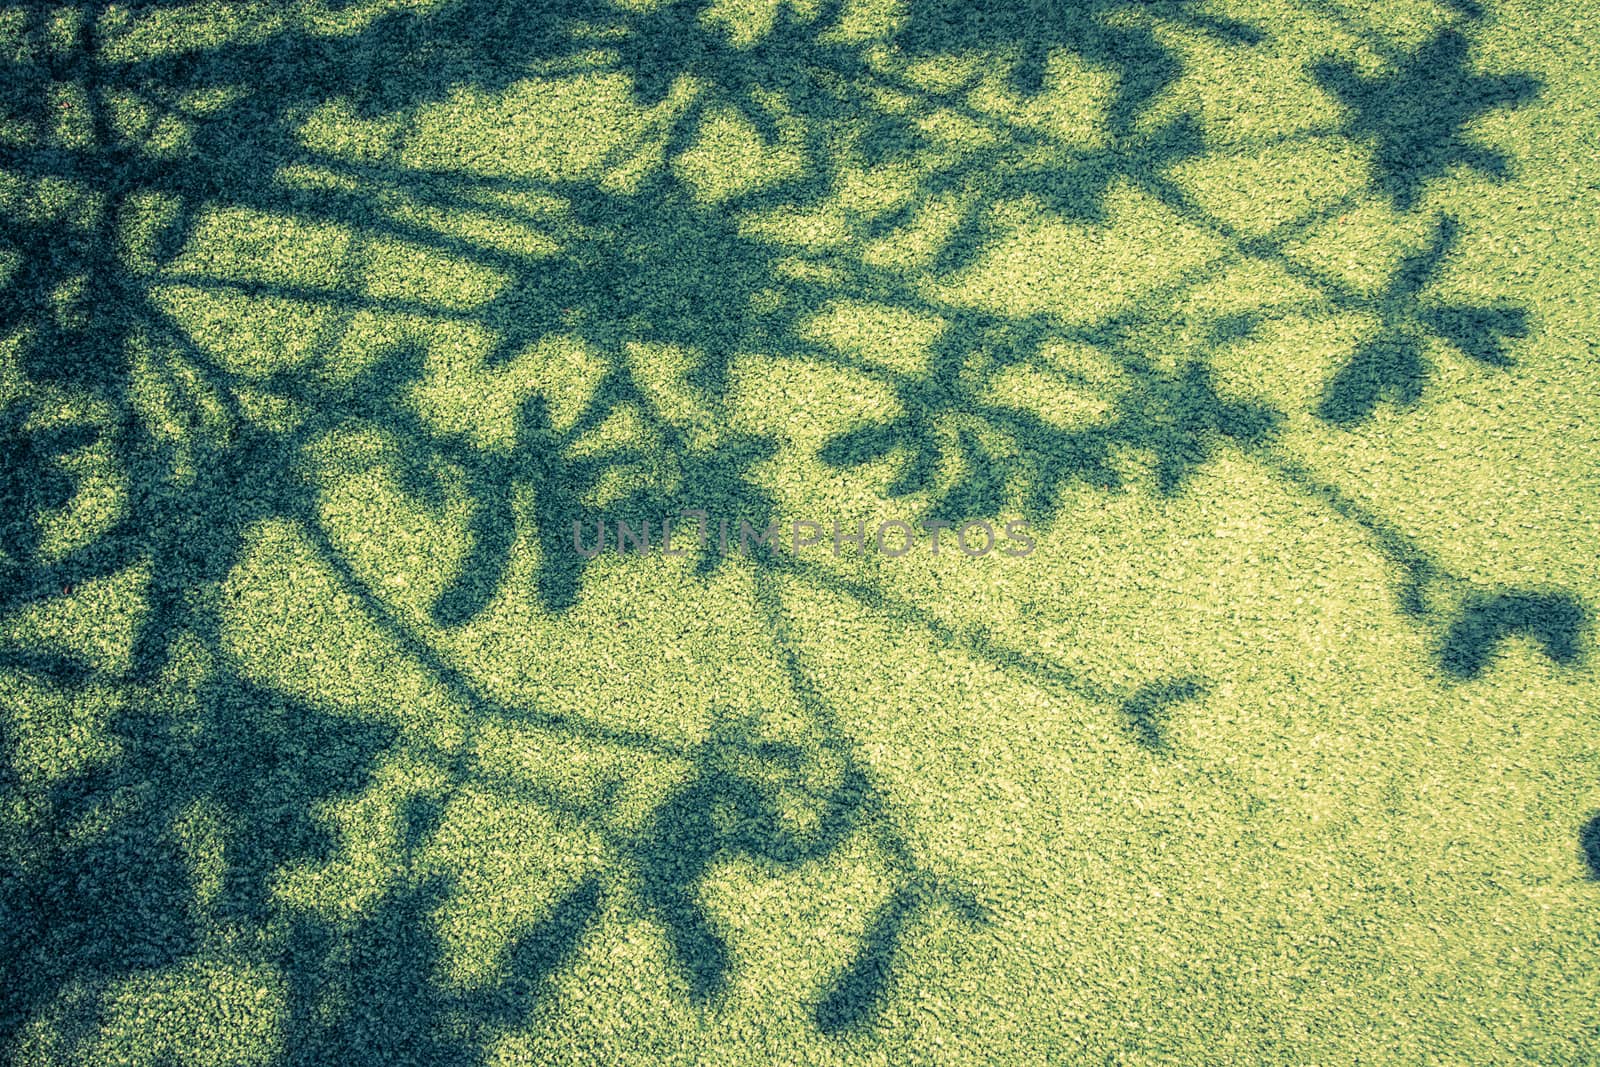  shadow of  tree on grass ground. Vintage filter. by ronnarong